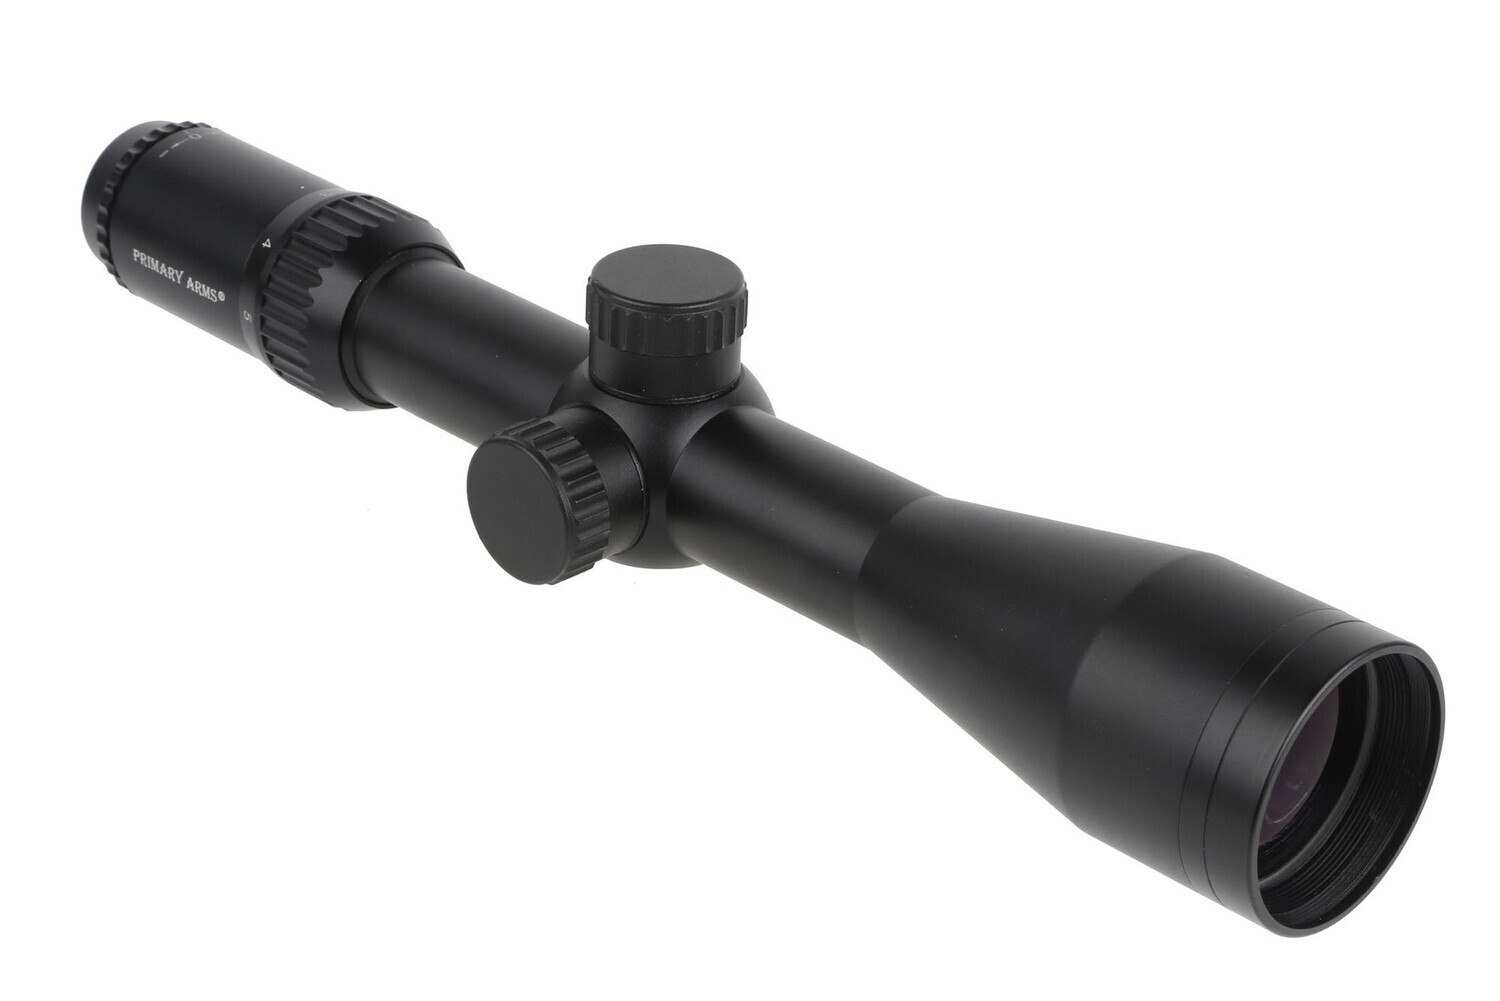 Primary Arms Classic Series 3-9x44mm SFP Small-Caliber Rifle Scope - Duplex